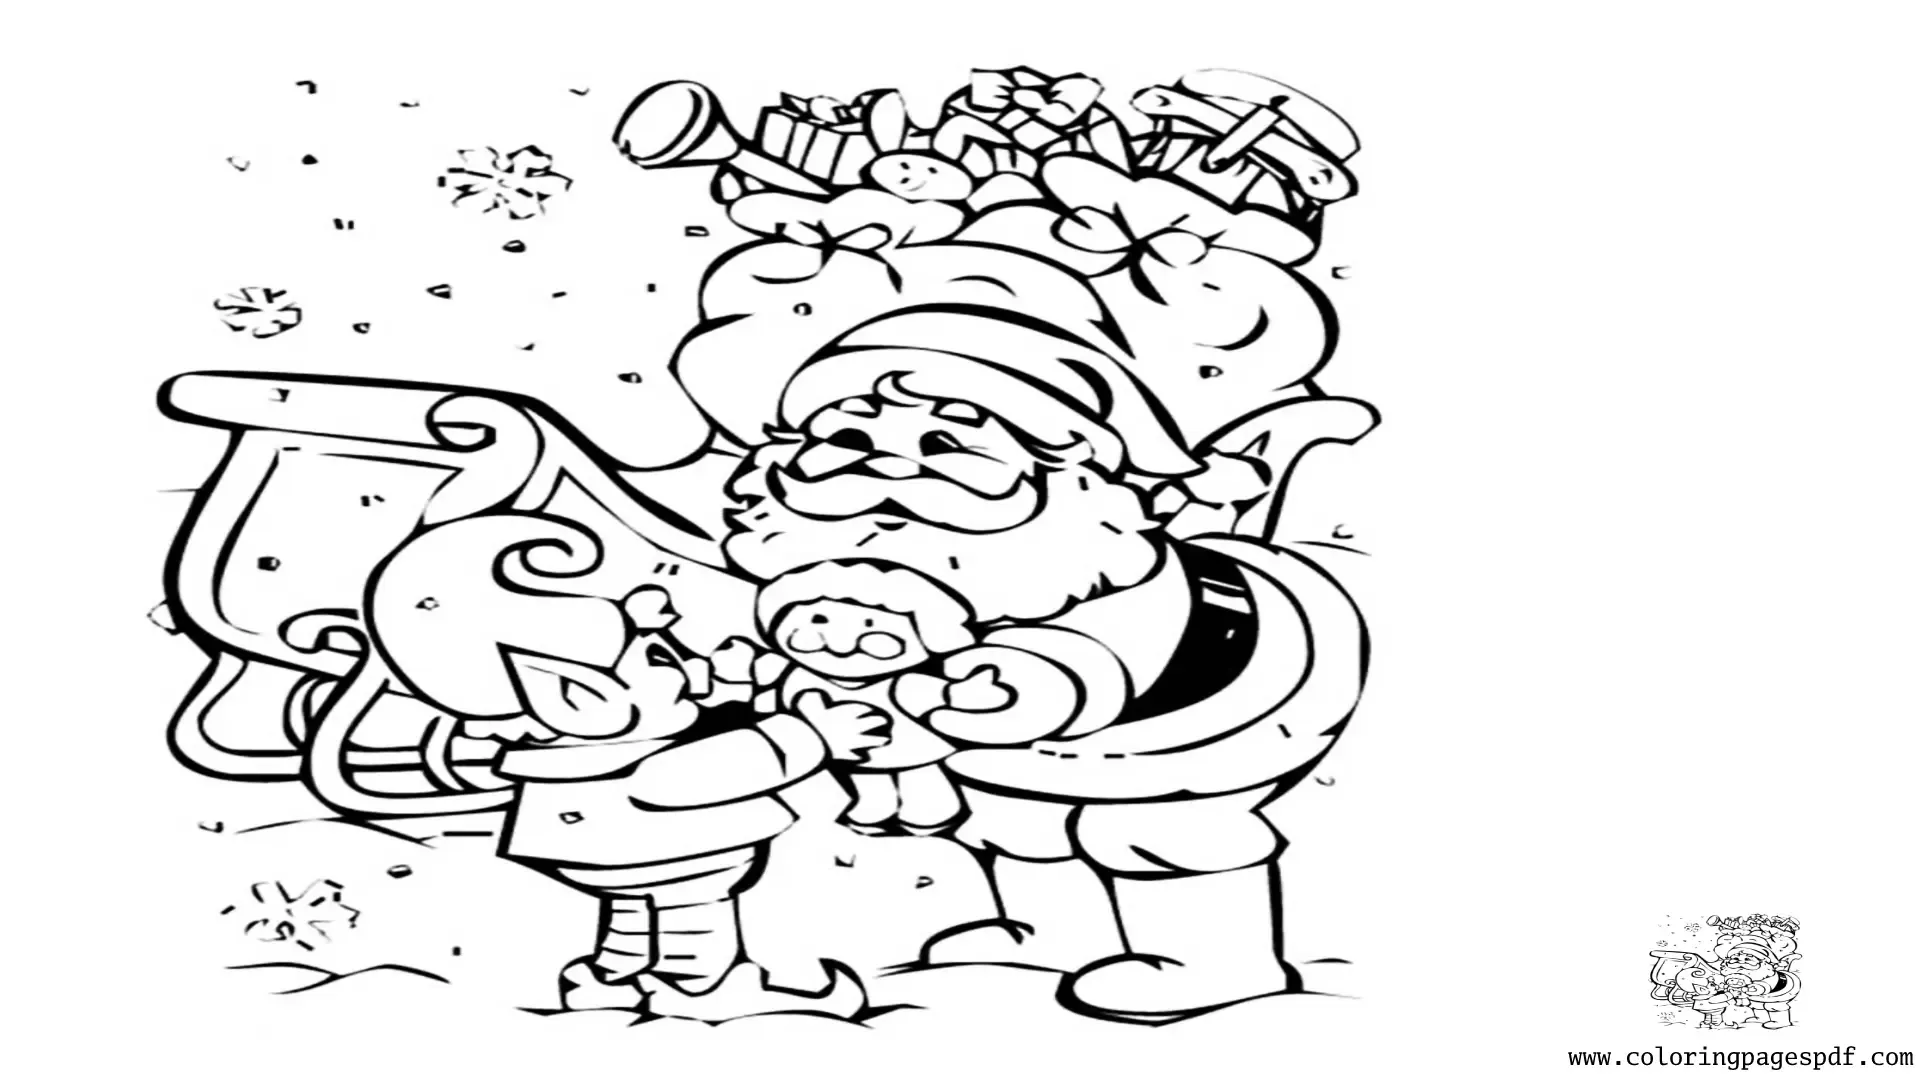 Coloring Page Of Santa Giving An Elf A Gift